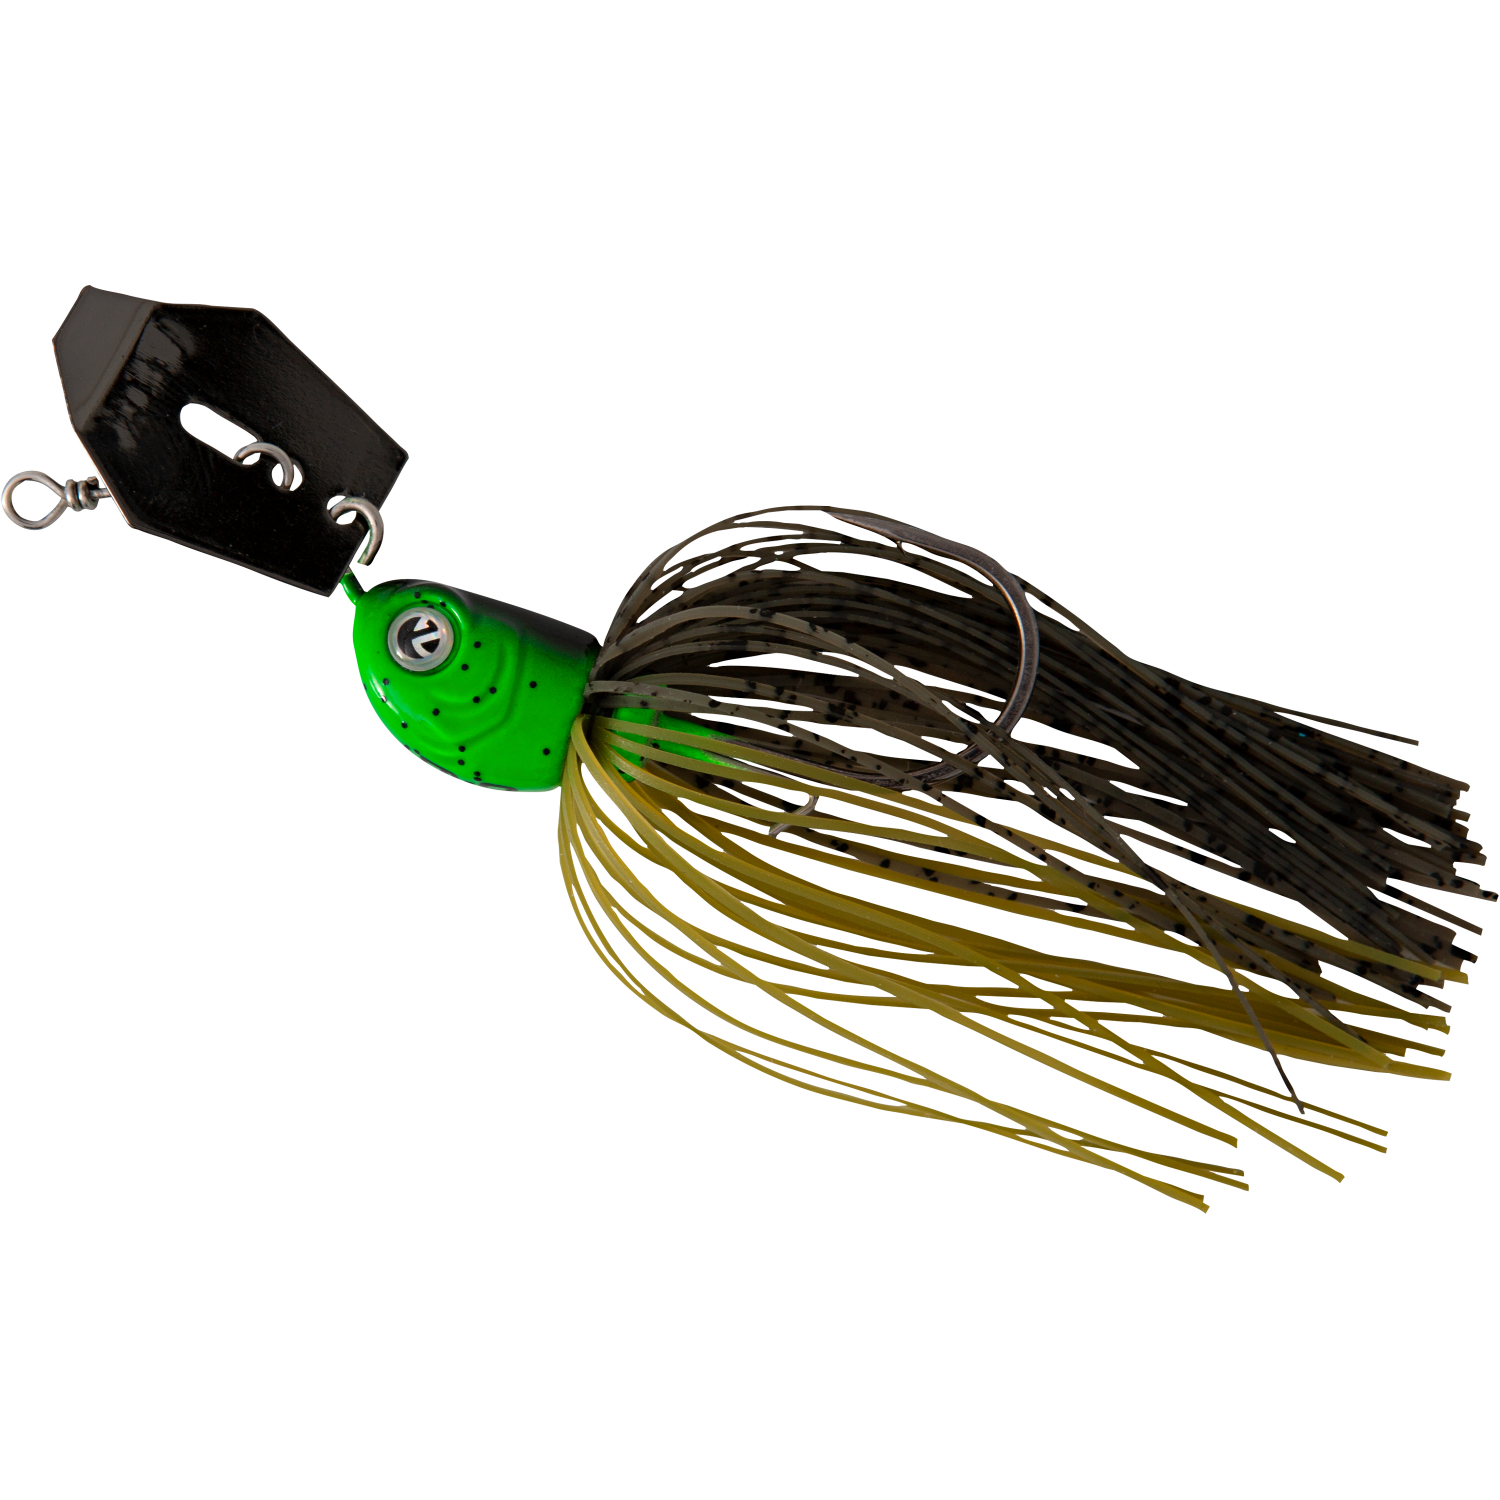 Zeck Chatterbait Bladed Jig (Moor Kiwi, 1/0) at low prices